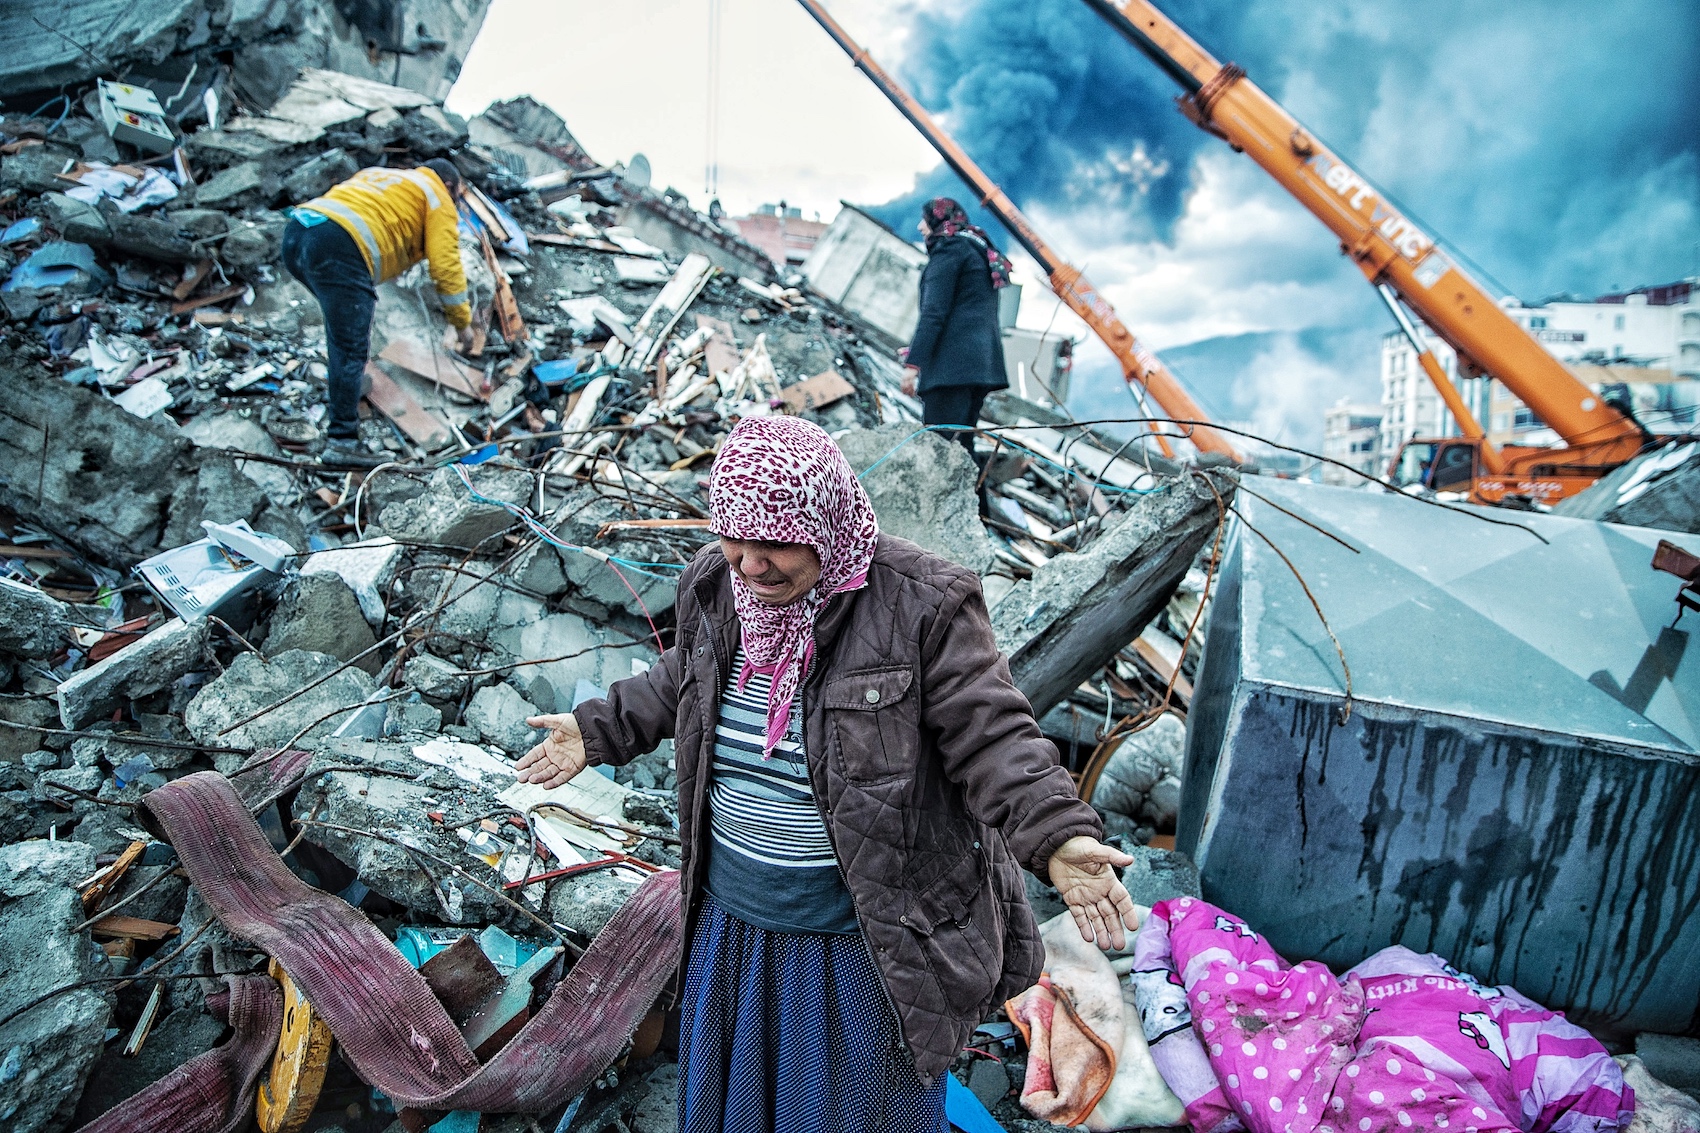 A Magnitude 7.8 Earthquake Struck Turkey And Syria And More Than 11,000 People Are Dead